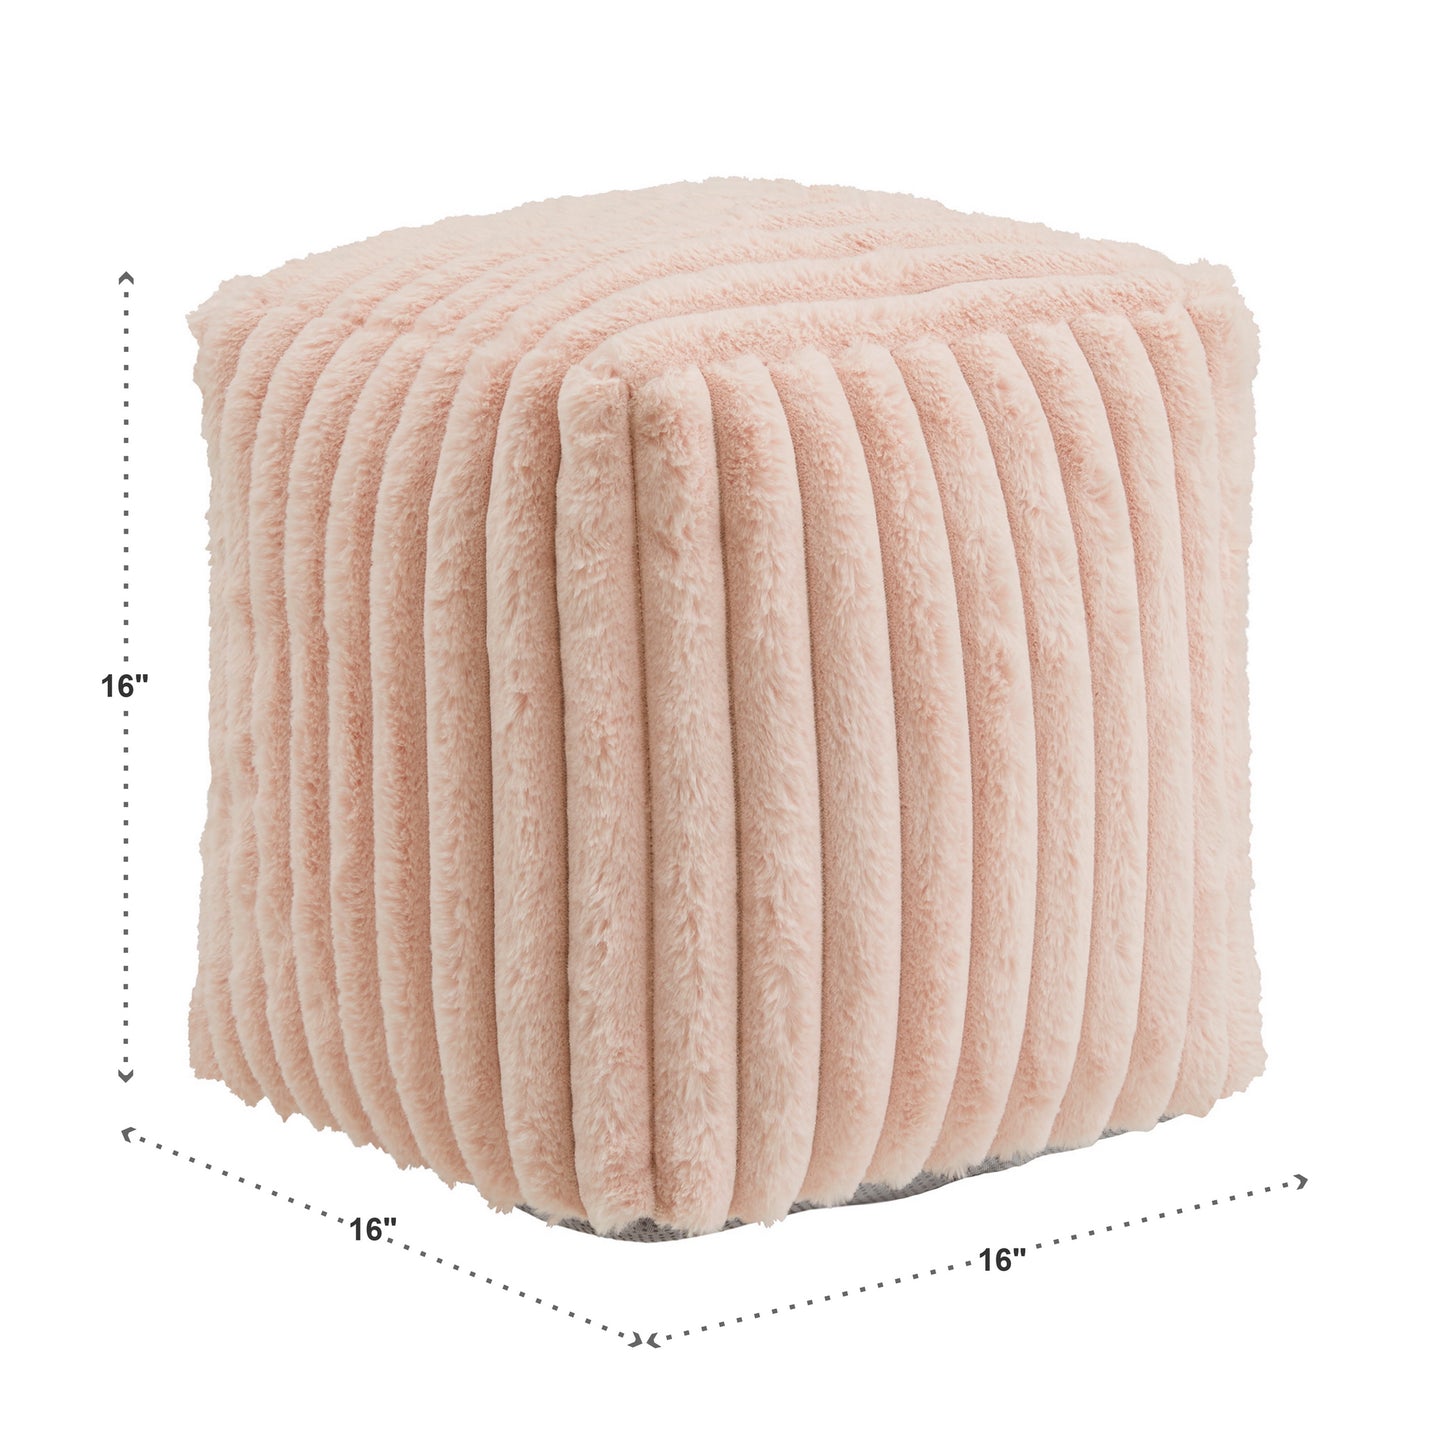 Upholstered Square Pouf Ottoman - Pink Channel Furry Fabric